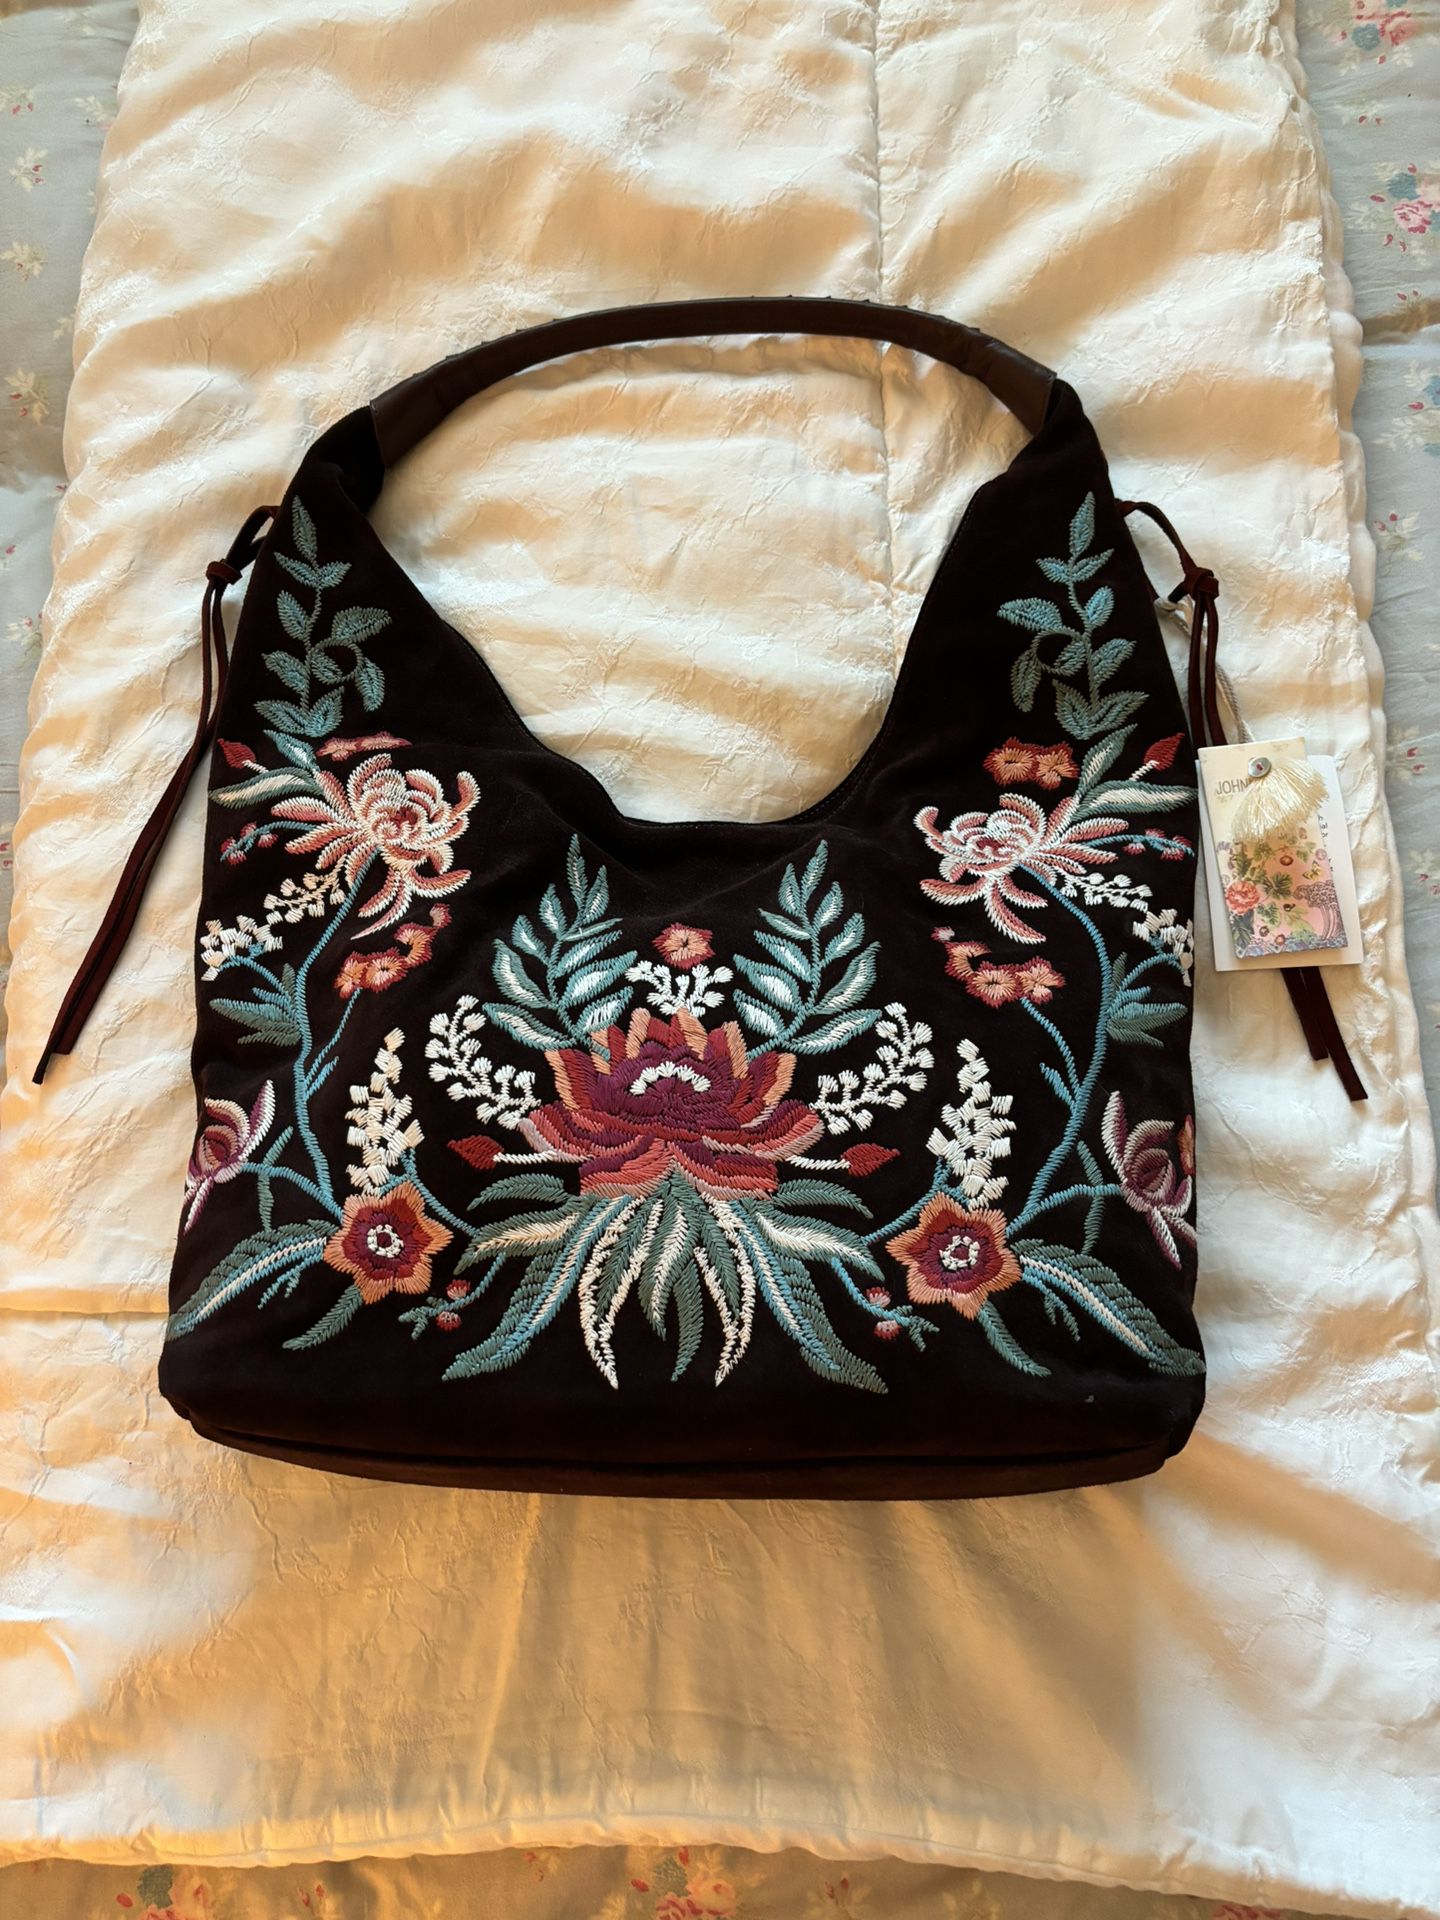 Johnny Was Embroidered Soft Hobo Tote Bag